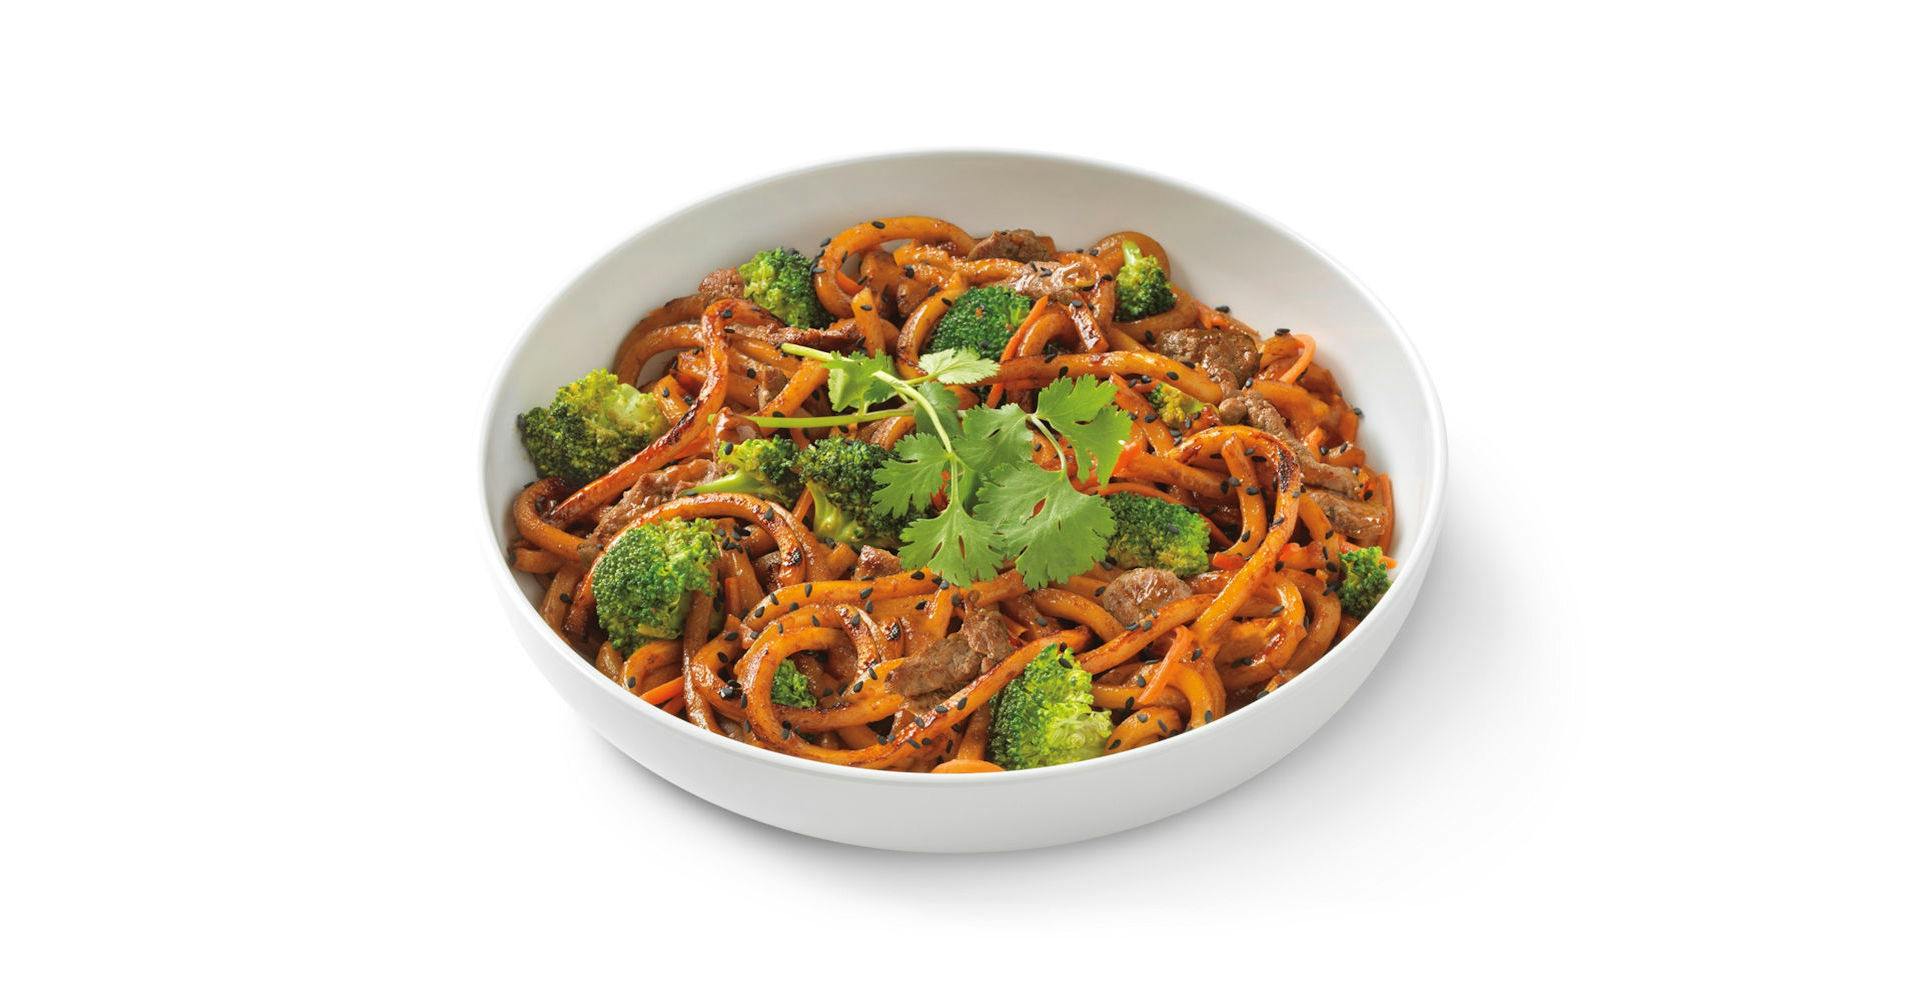 Japanese Pan Noodles with Marinated Steak from Noodles & Company - Fond du Lac in Fond du Lac, WI